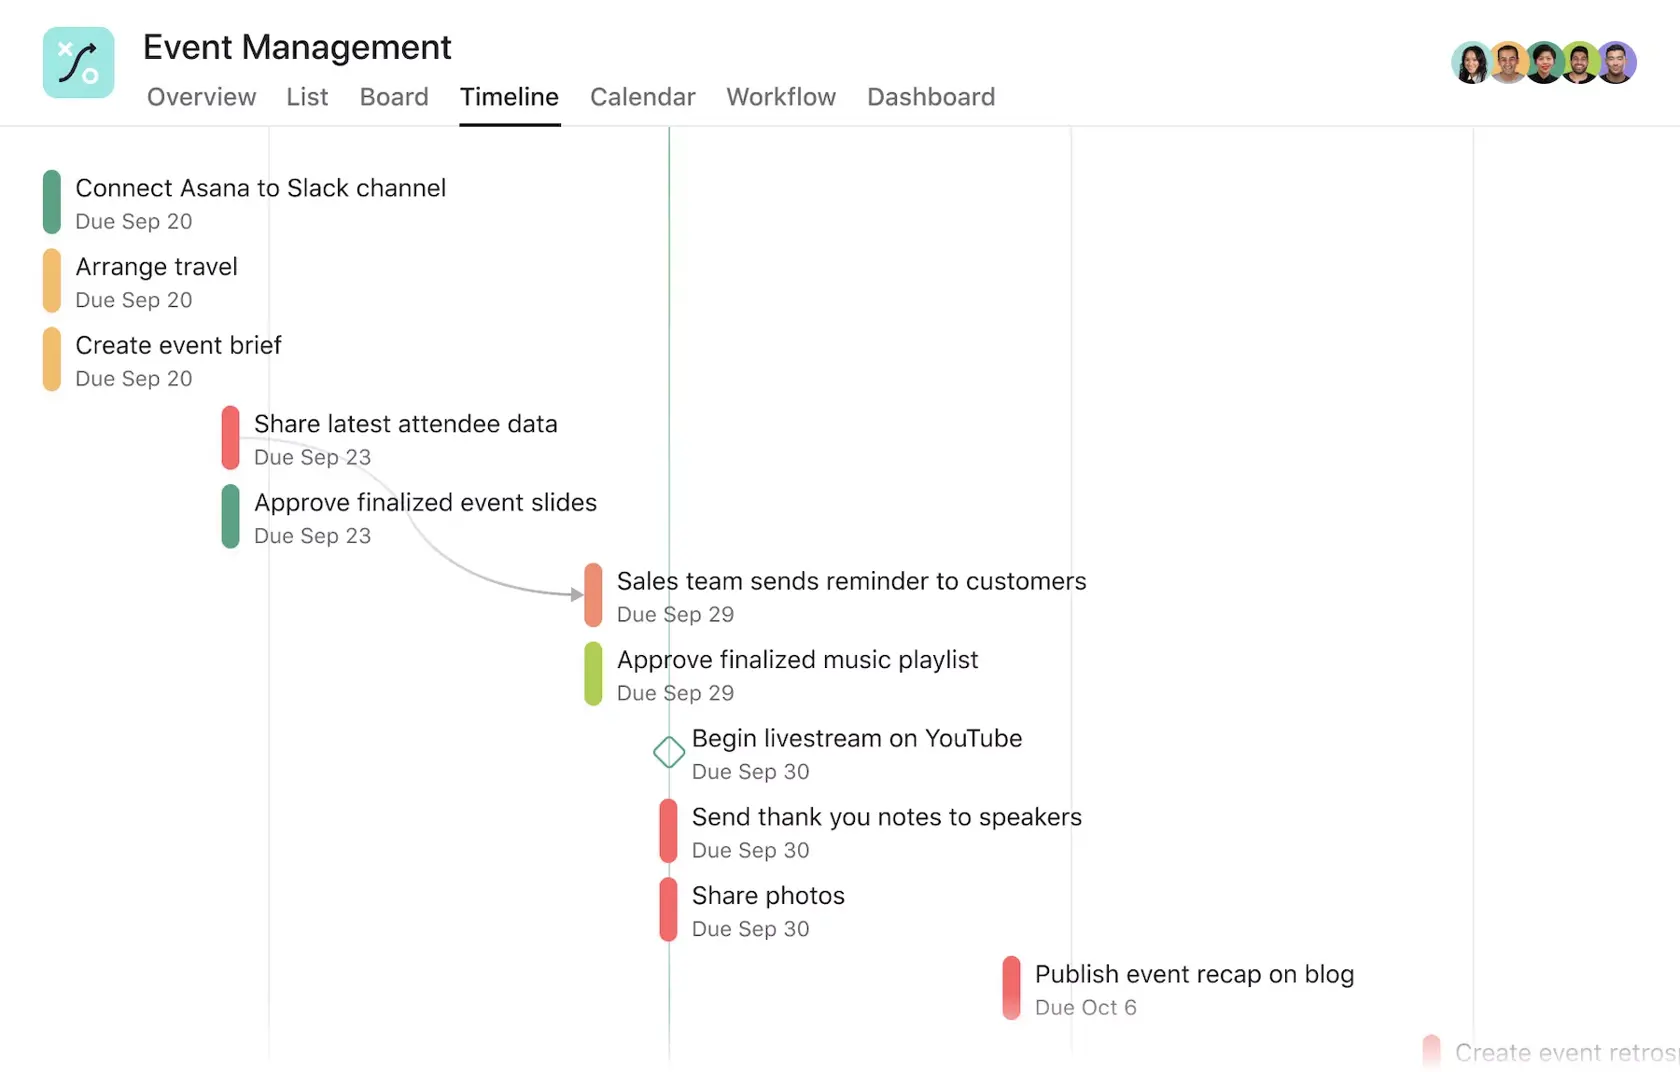 [Product UI] Event management project example (Timeline)